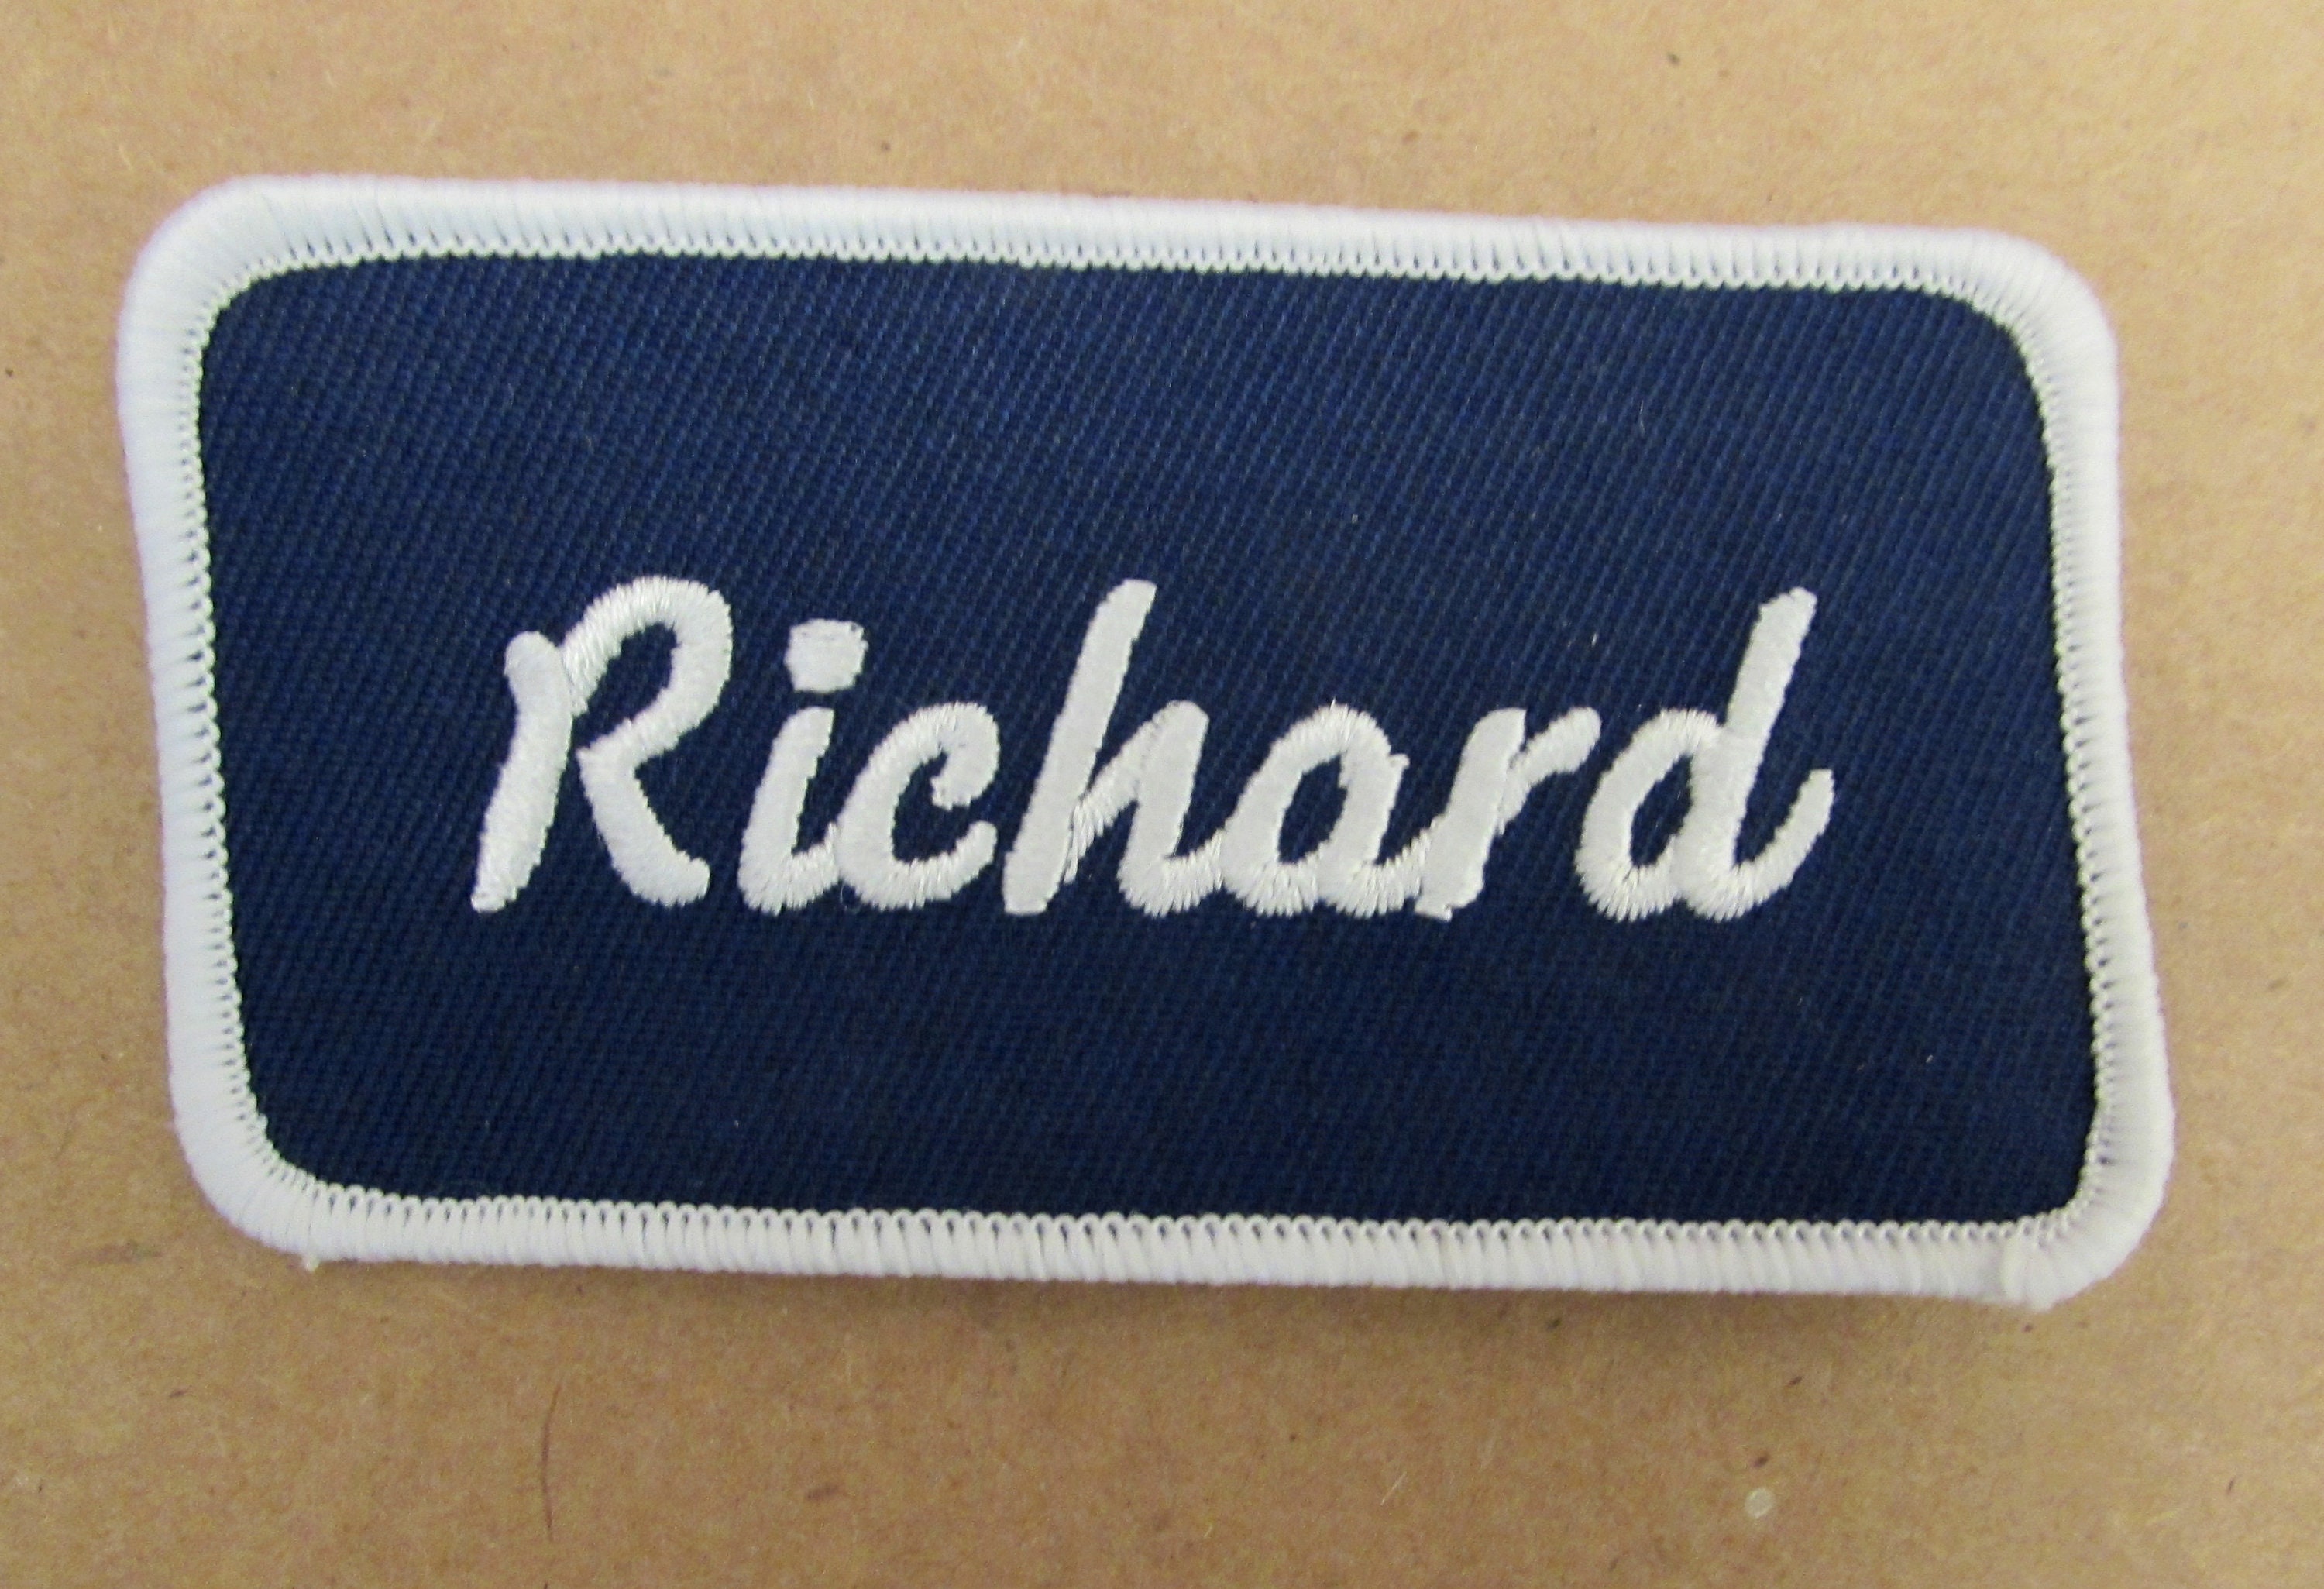 Blue Name Patch, Vintage Embroidered Clothing Patch, Mechanic